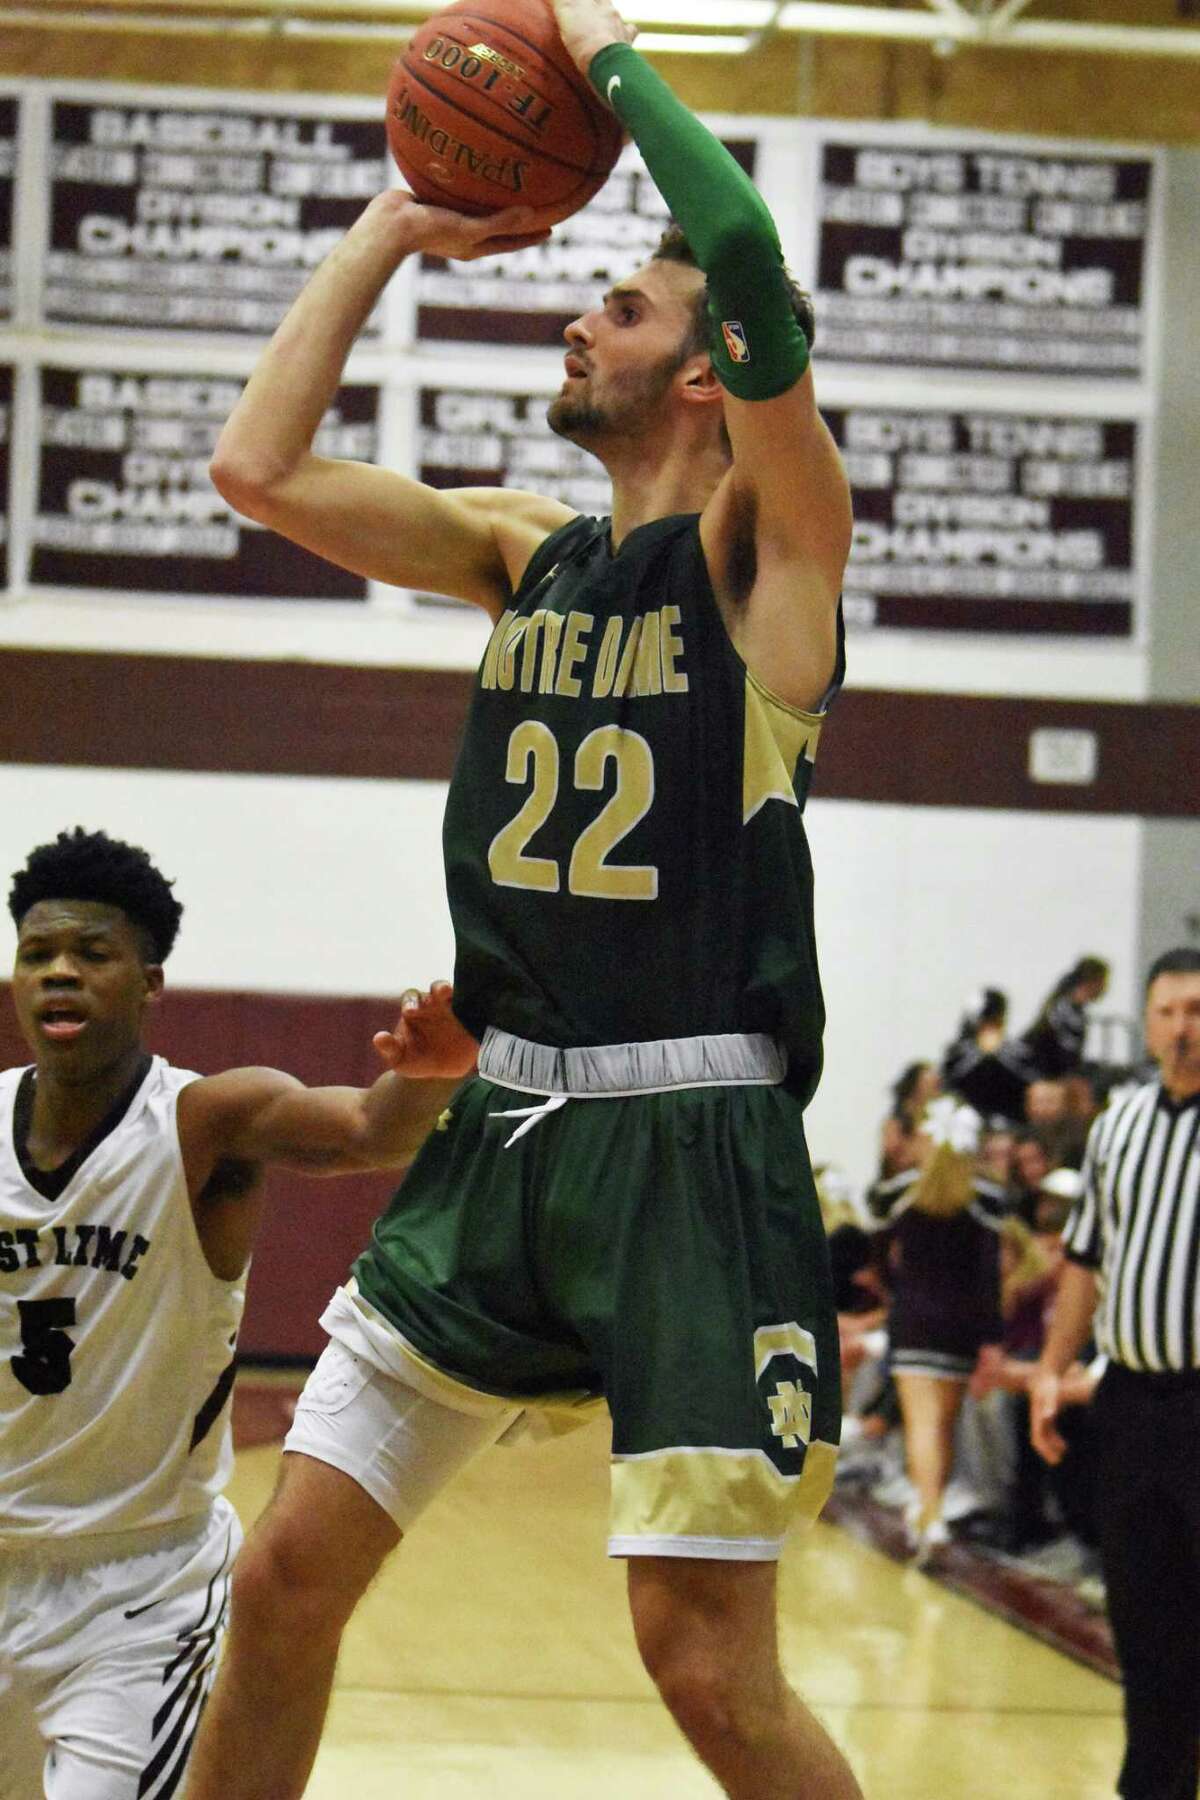 Notre Dame-West Haven’s Connor Raines shoots vs. East Lyme at East Lyme on Saturday, December 15, 2018. (Pete Paguaga, Hearst Connecticut Media)